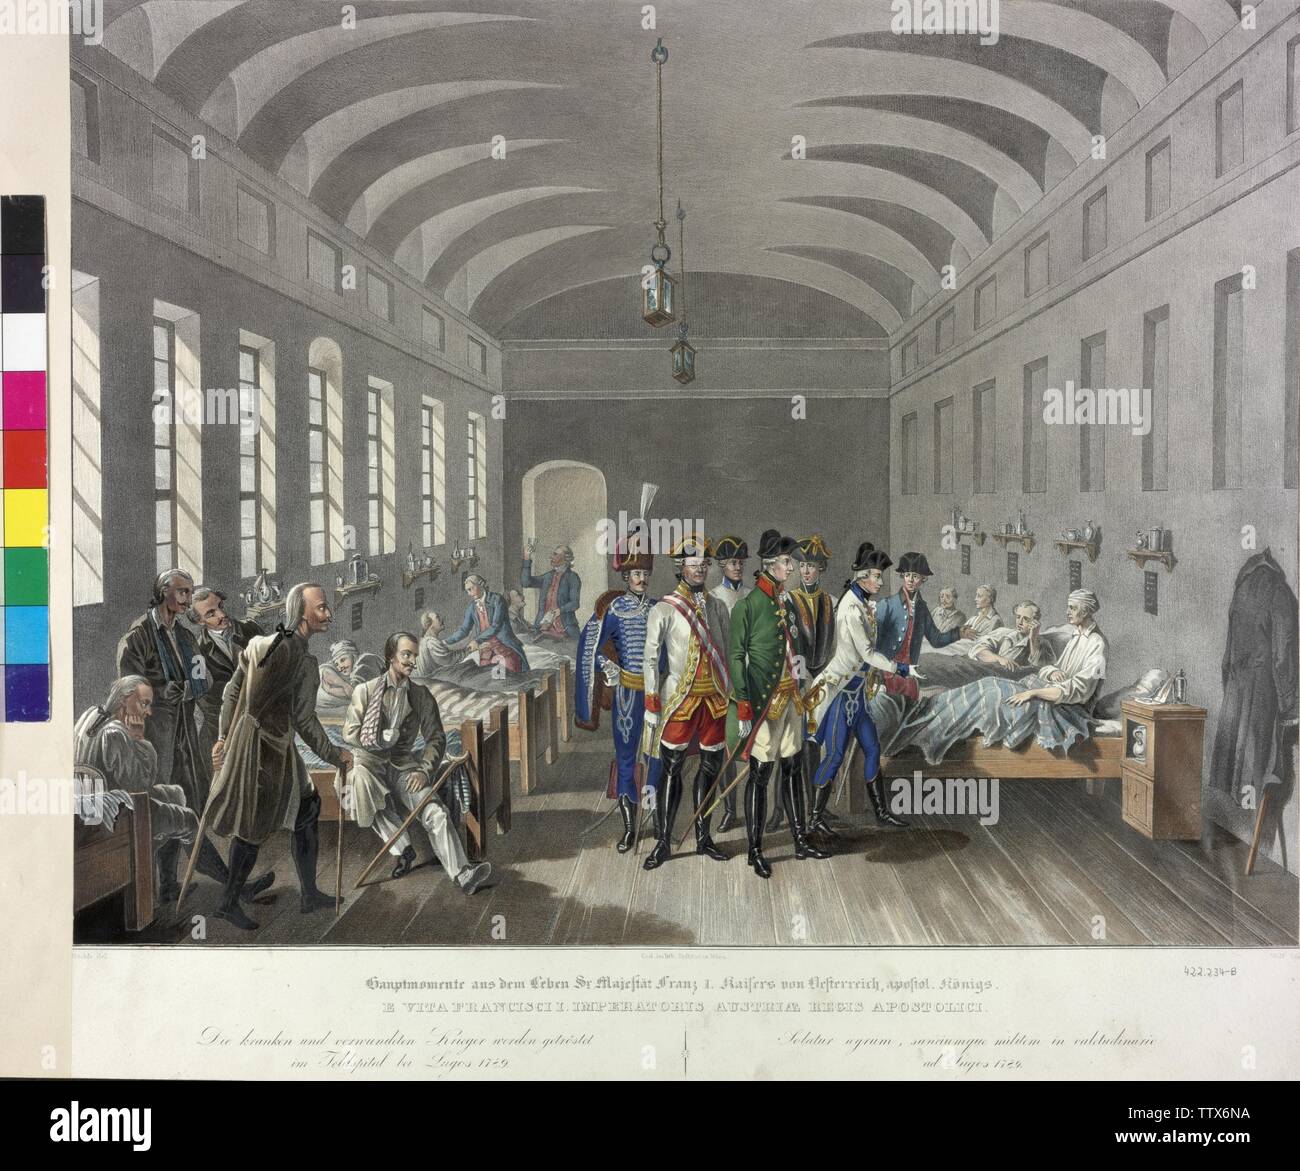 visitation in the field hospital near Lugoj 1789, Archduke Franz visiting the casualties in the field hospital of Lugoj in the Banat (Hungarian 'Lugos'), lithograph by Franz Wolf based on a template by Johann Nepomuk Hoechle, from the series 'Hauptmomente aus dem Leben Sr. Majestät Franz I.', Additional-Rights-Clearance-Info-Not-Available Stock Photo